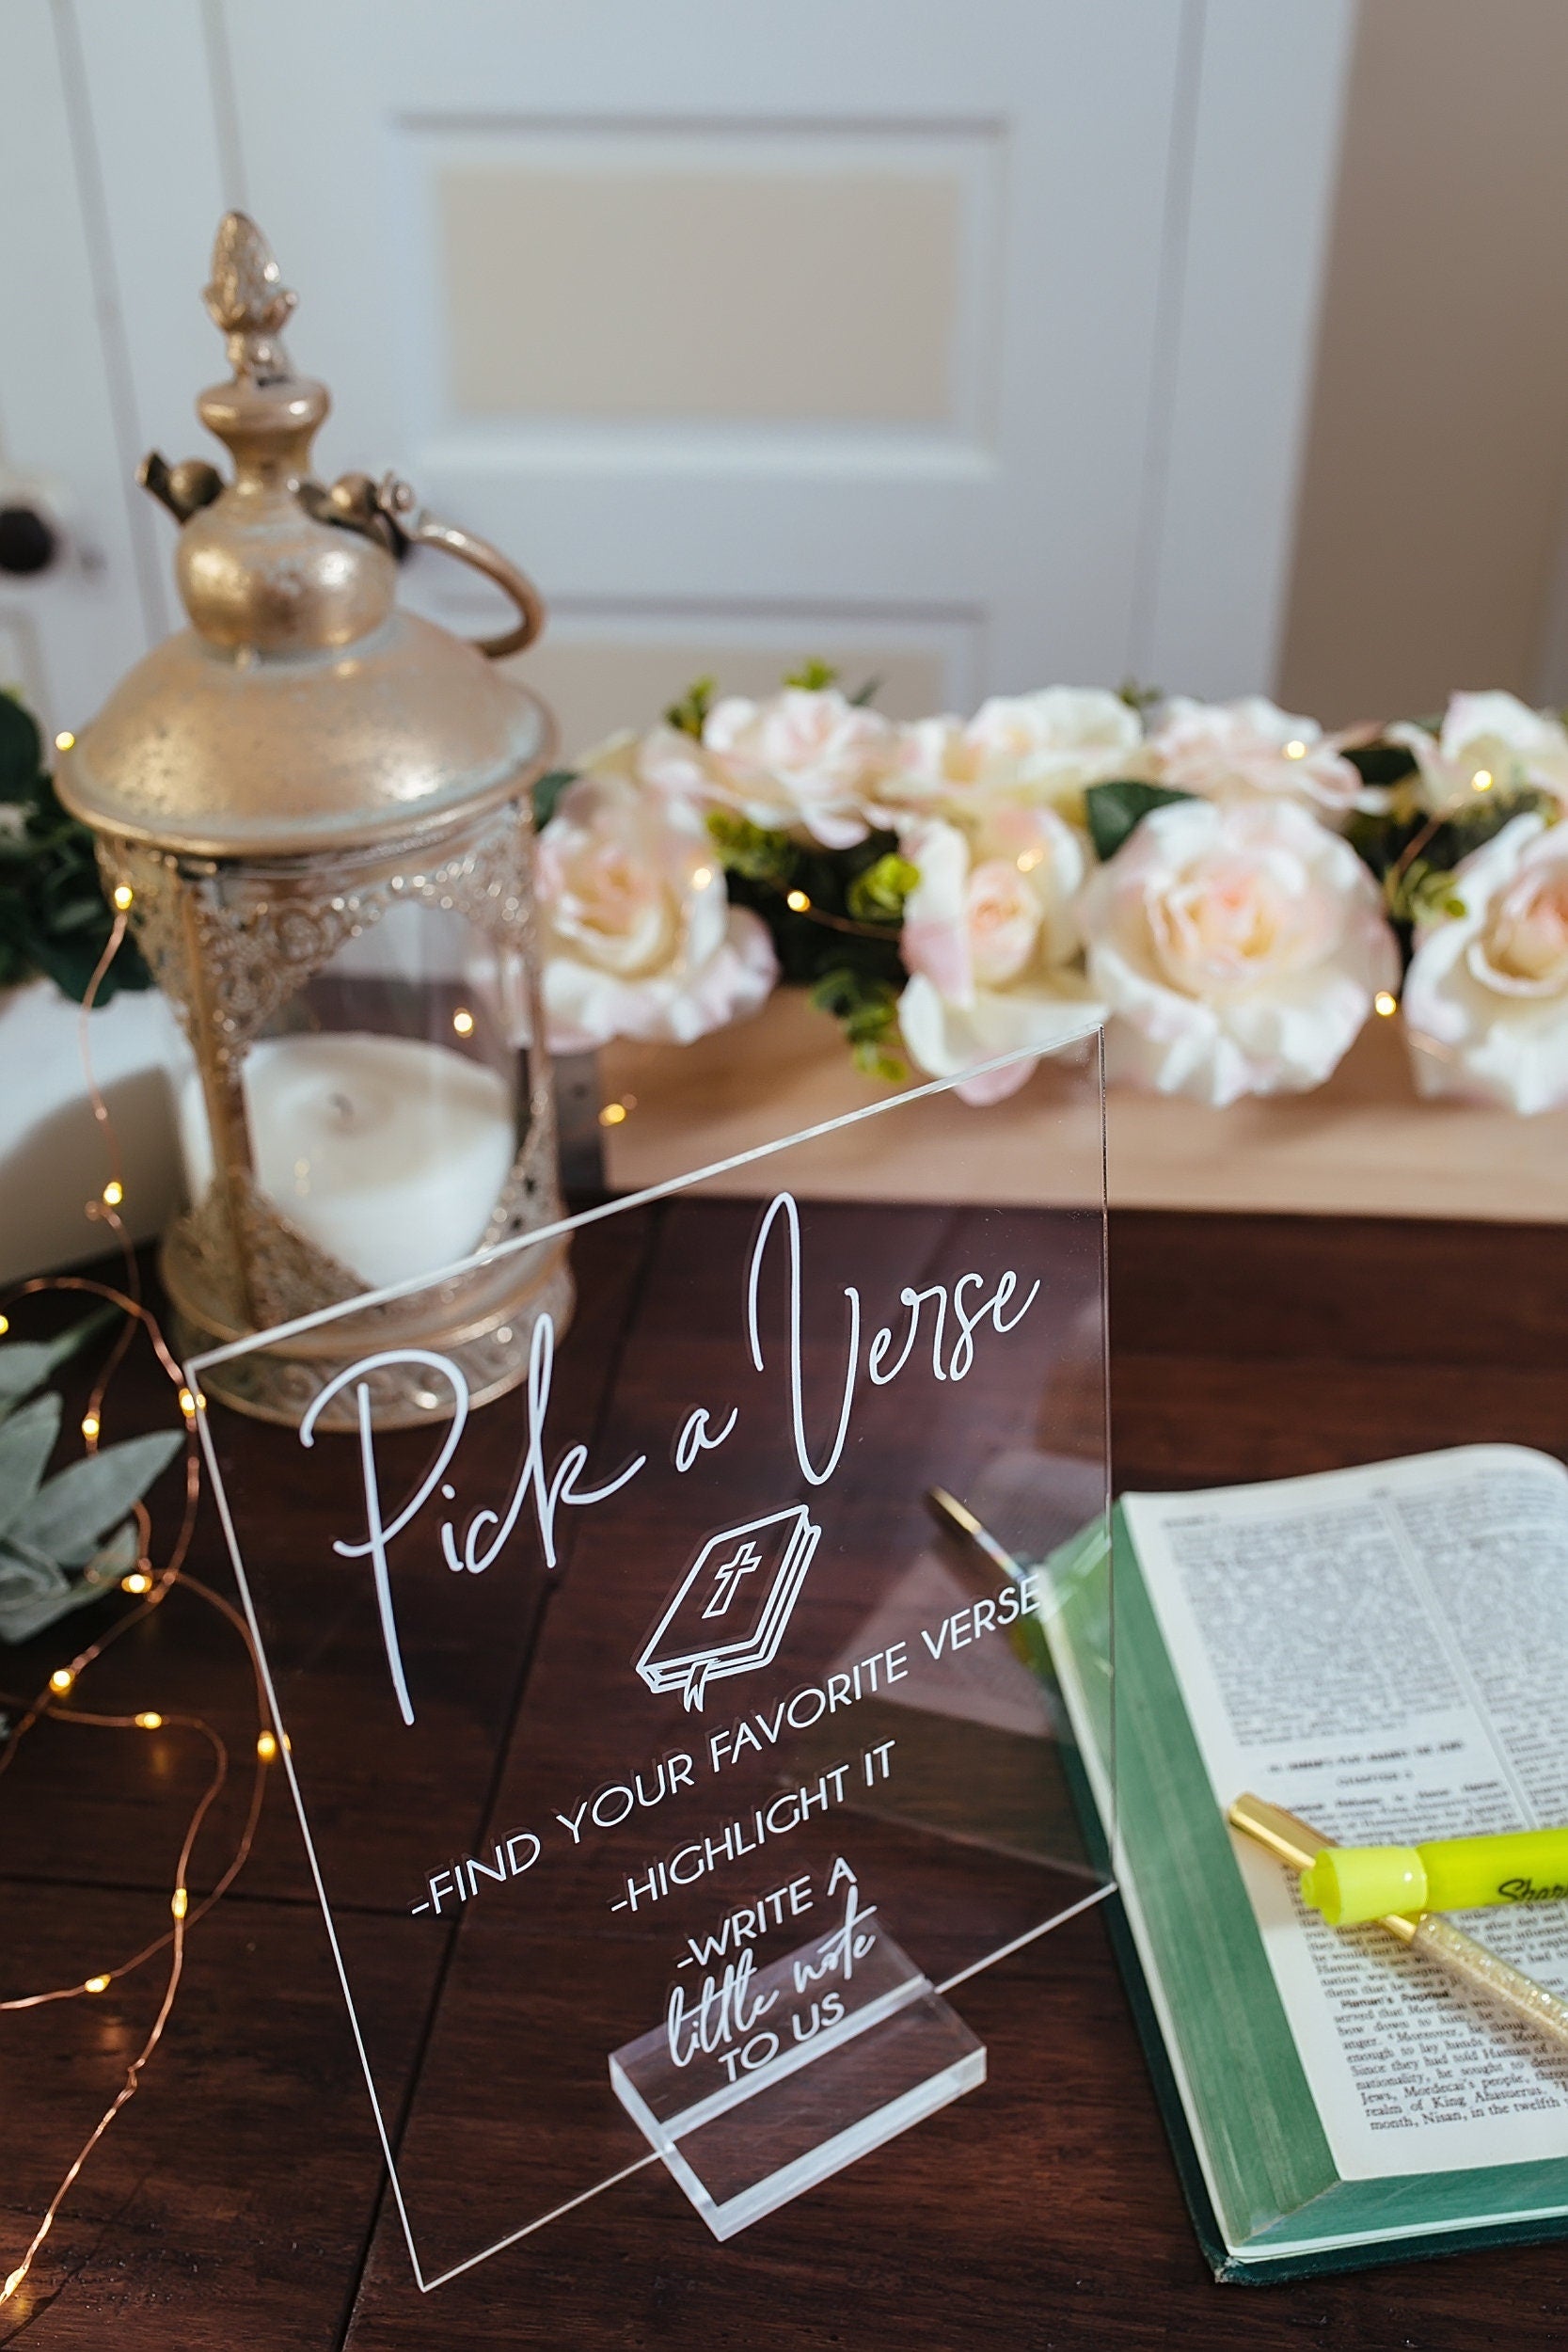 Pick Or Highlight Your Favorite Bible Verse Guestbook Clear Glass Look Acrylic Wedding Sign, Guest Book Plexiglass Perspex Lucite Table Sign